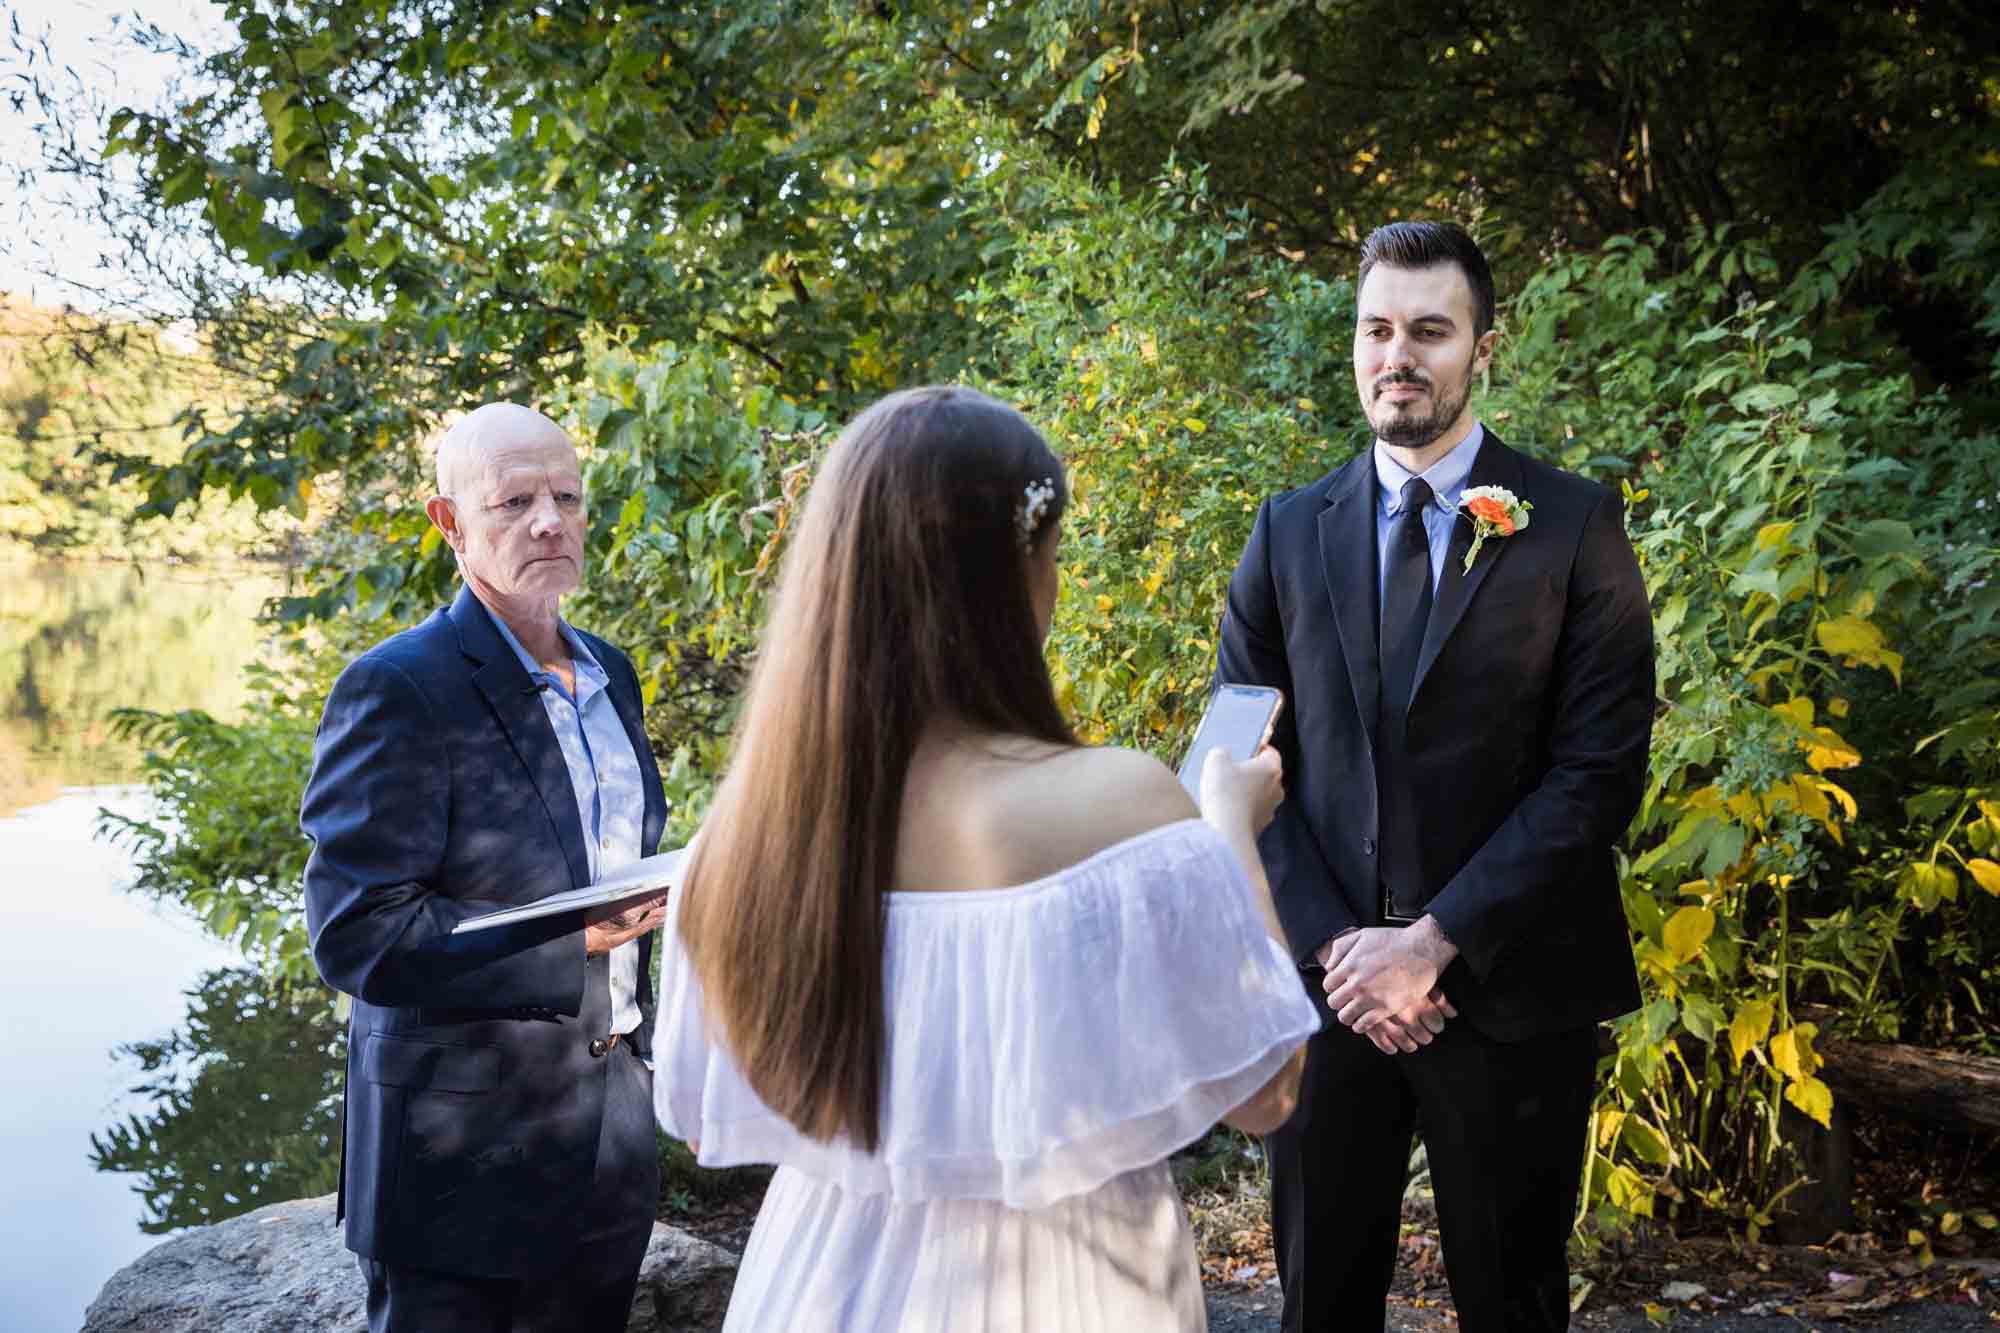 Bride and groom saying vows in front of officiant Article on how to elope in Central Park by NYC wedding photojournalist, Kelly Williams. Includes photos from a real wedding near Bow Bridge.